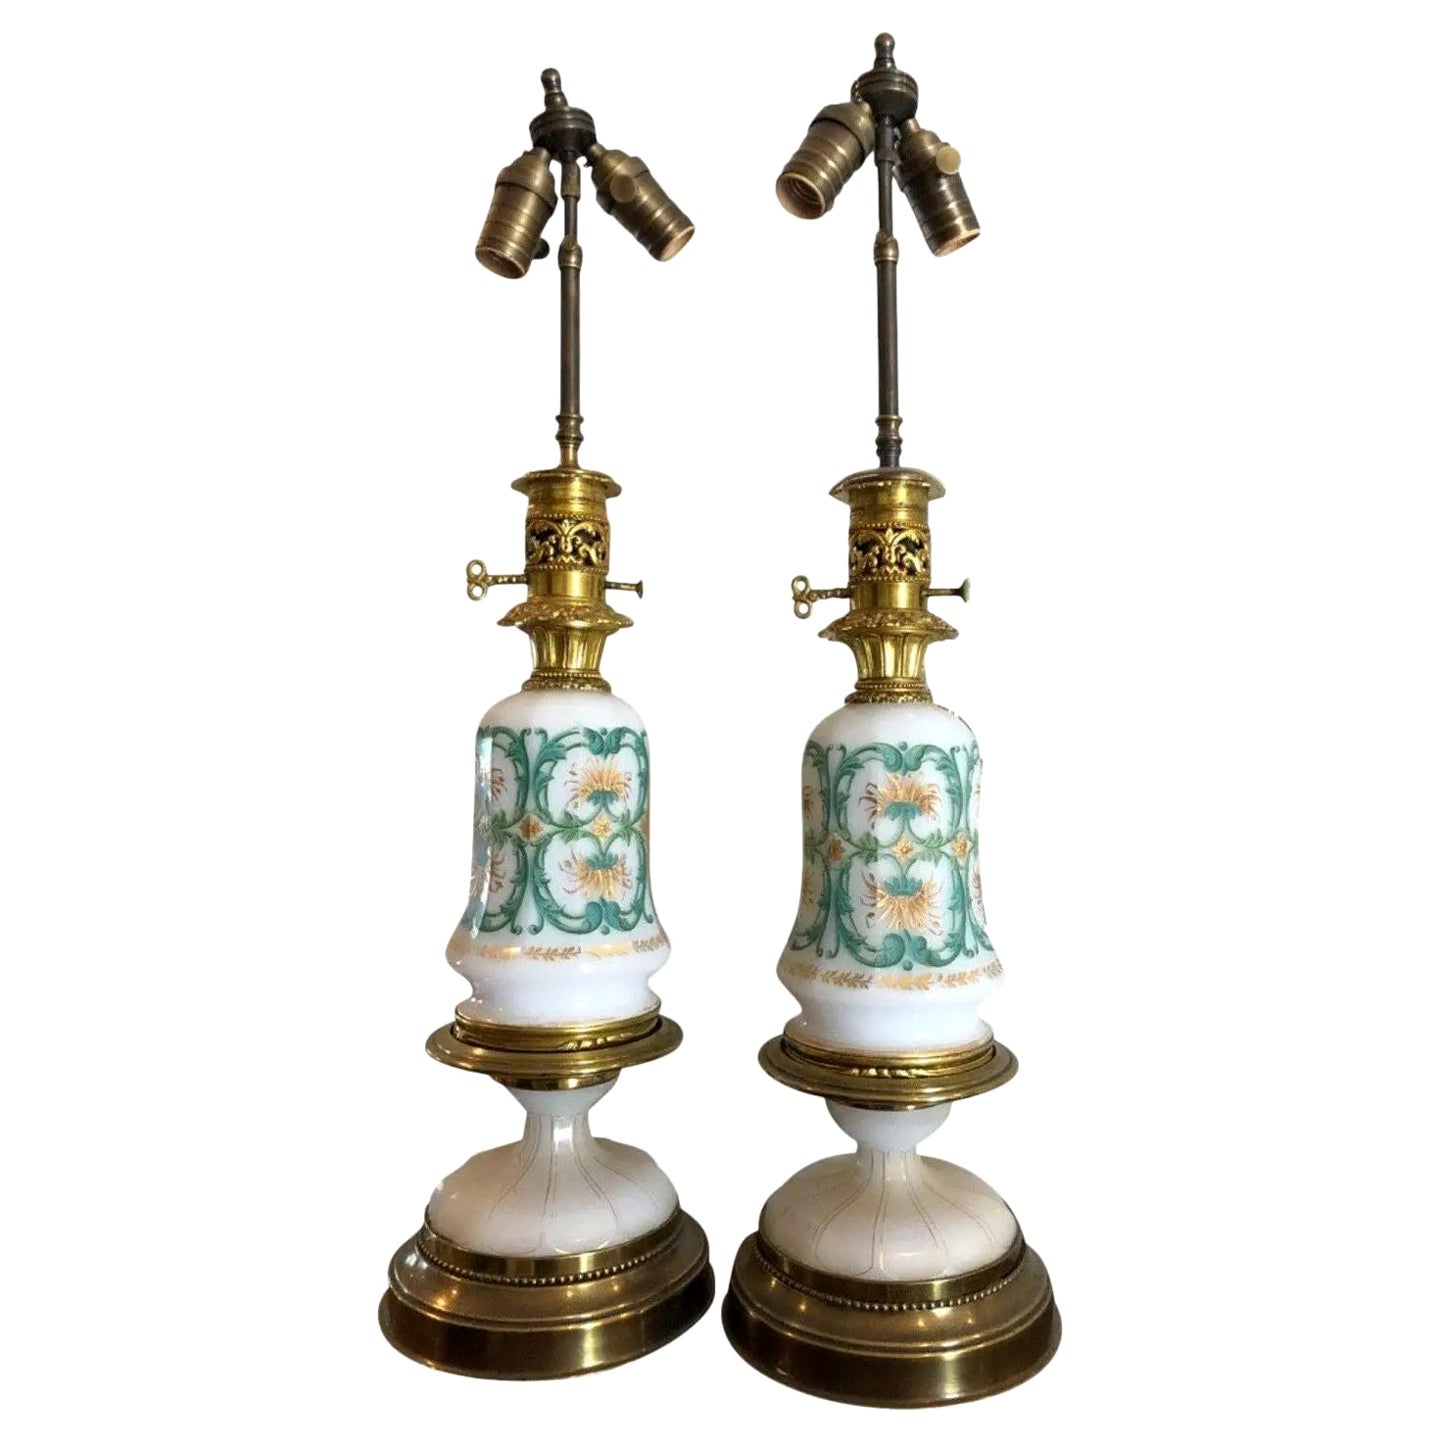 Pair of Antique French Opaline Glass Designer Table Lamps, Late 19th Century For Sale